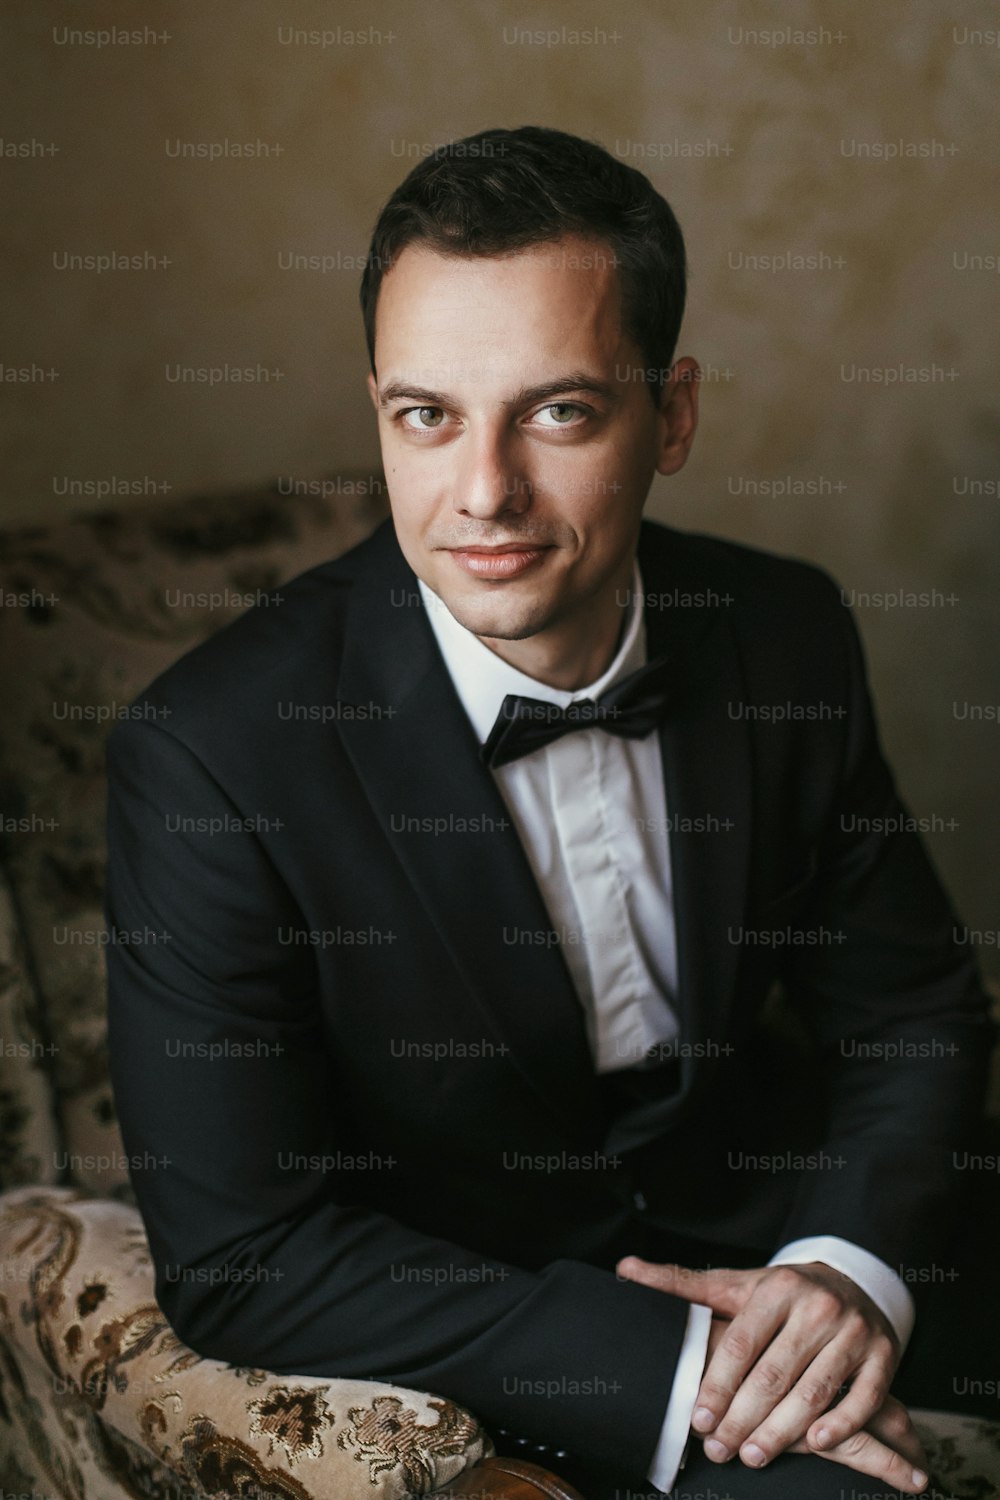 handsome Groom portrait in the morning in the room. happy man in suit with bow tie smiling, sitting in chair at window light in hotel. preparation for wedding day